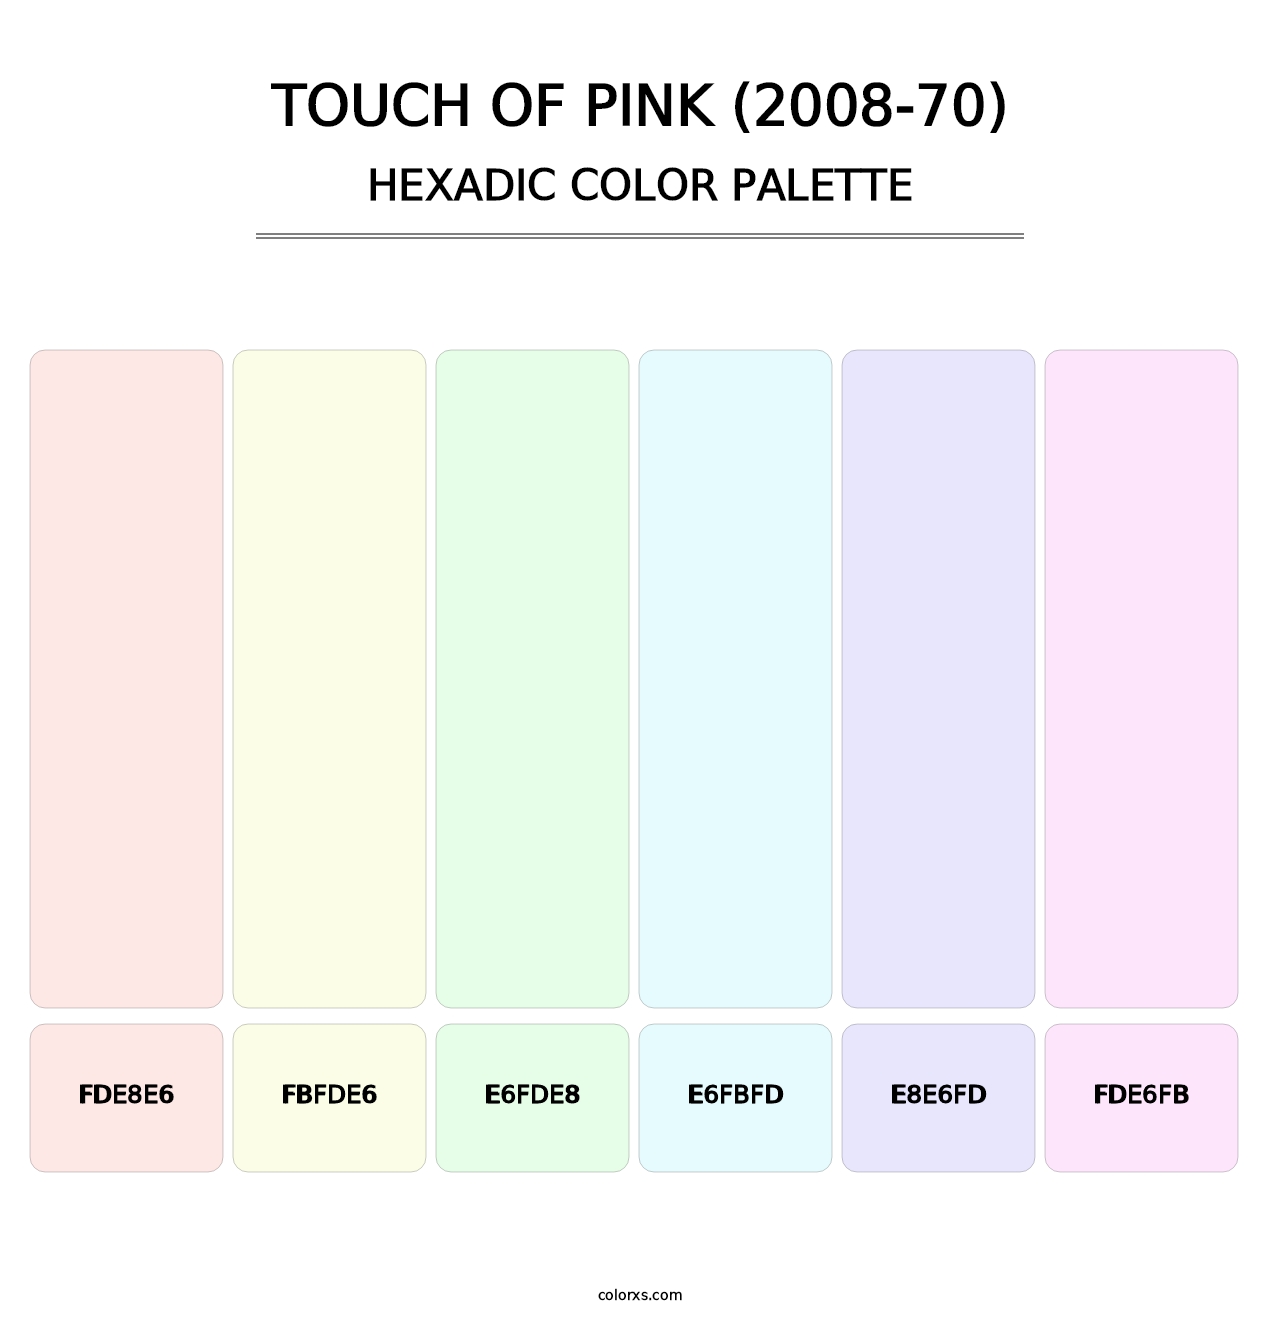 Touch of Pink (2008-70) - Hexadic Color Palette